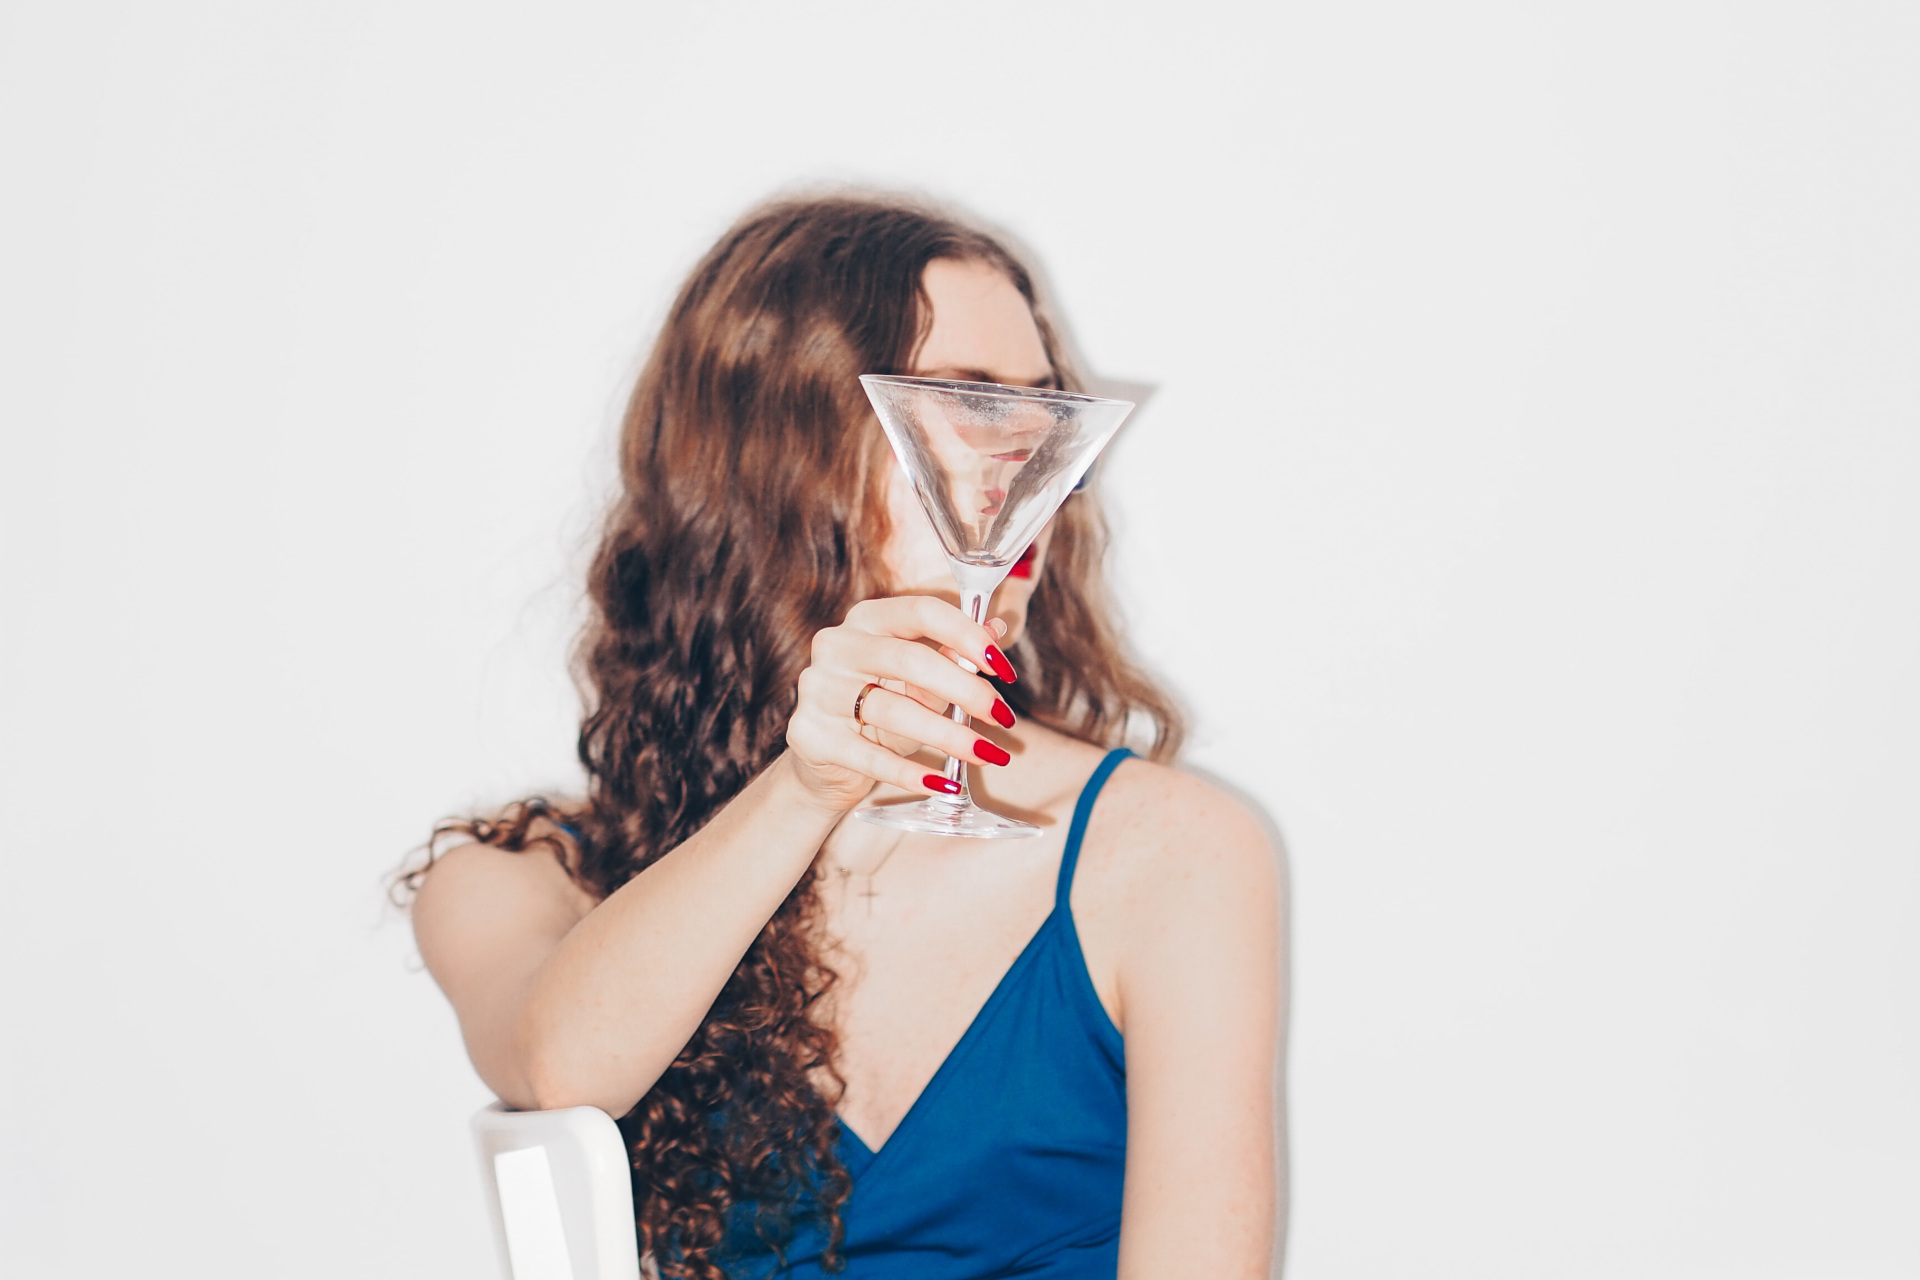 Redhaired woman in blue dress holding martini glass in front of her face, as she sits on a white chair in front of a white background